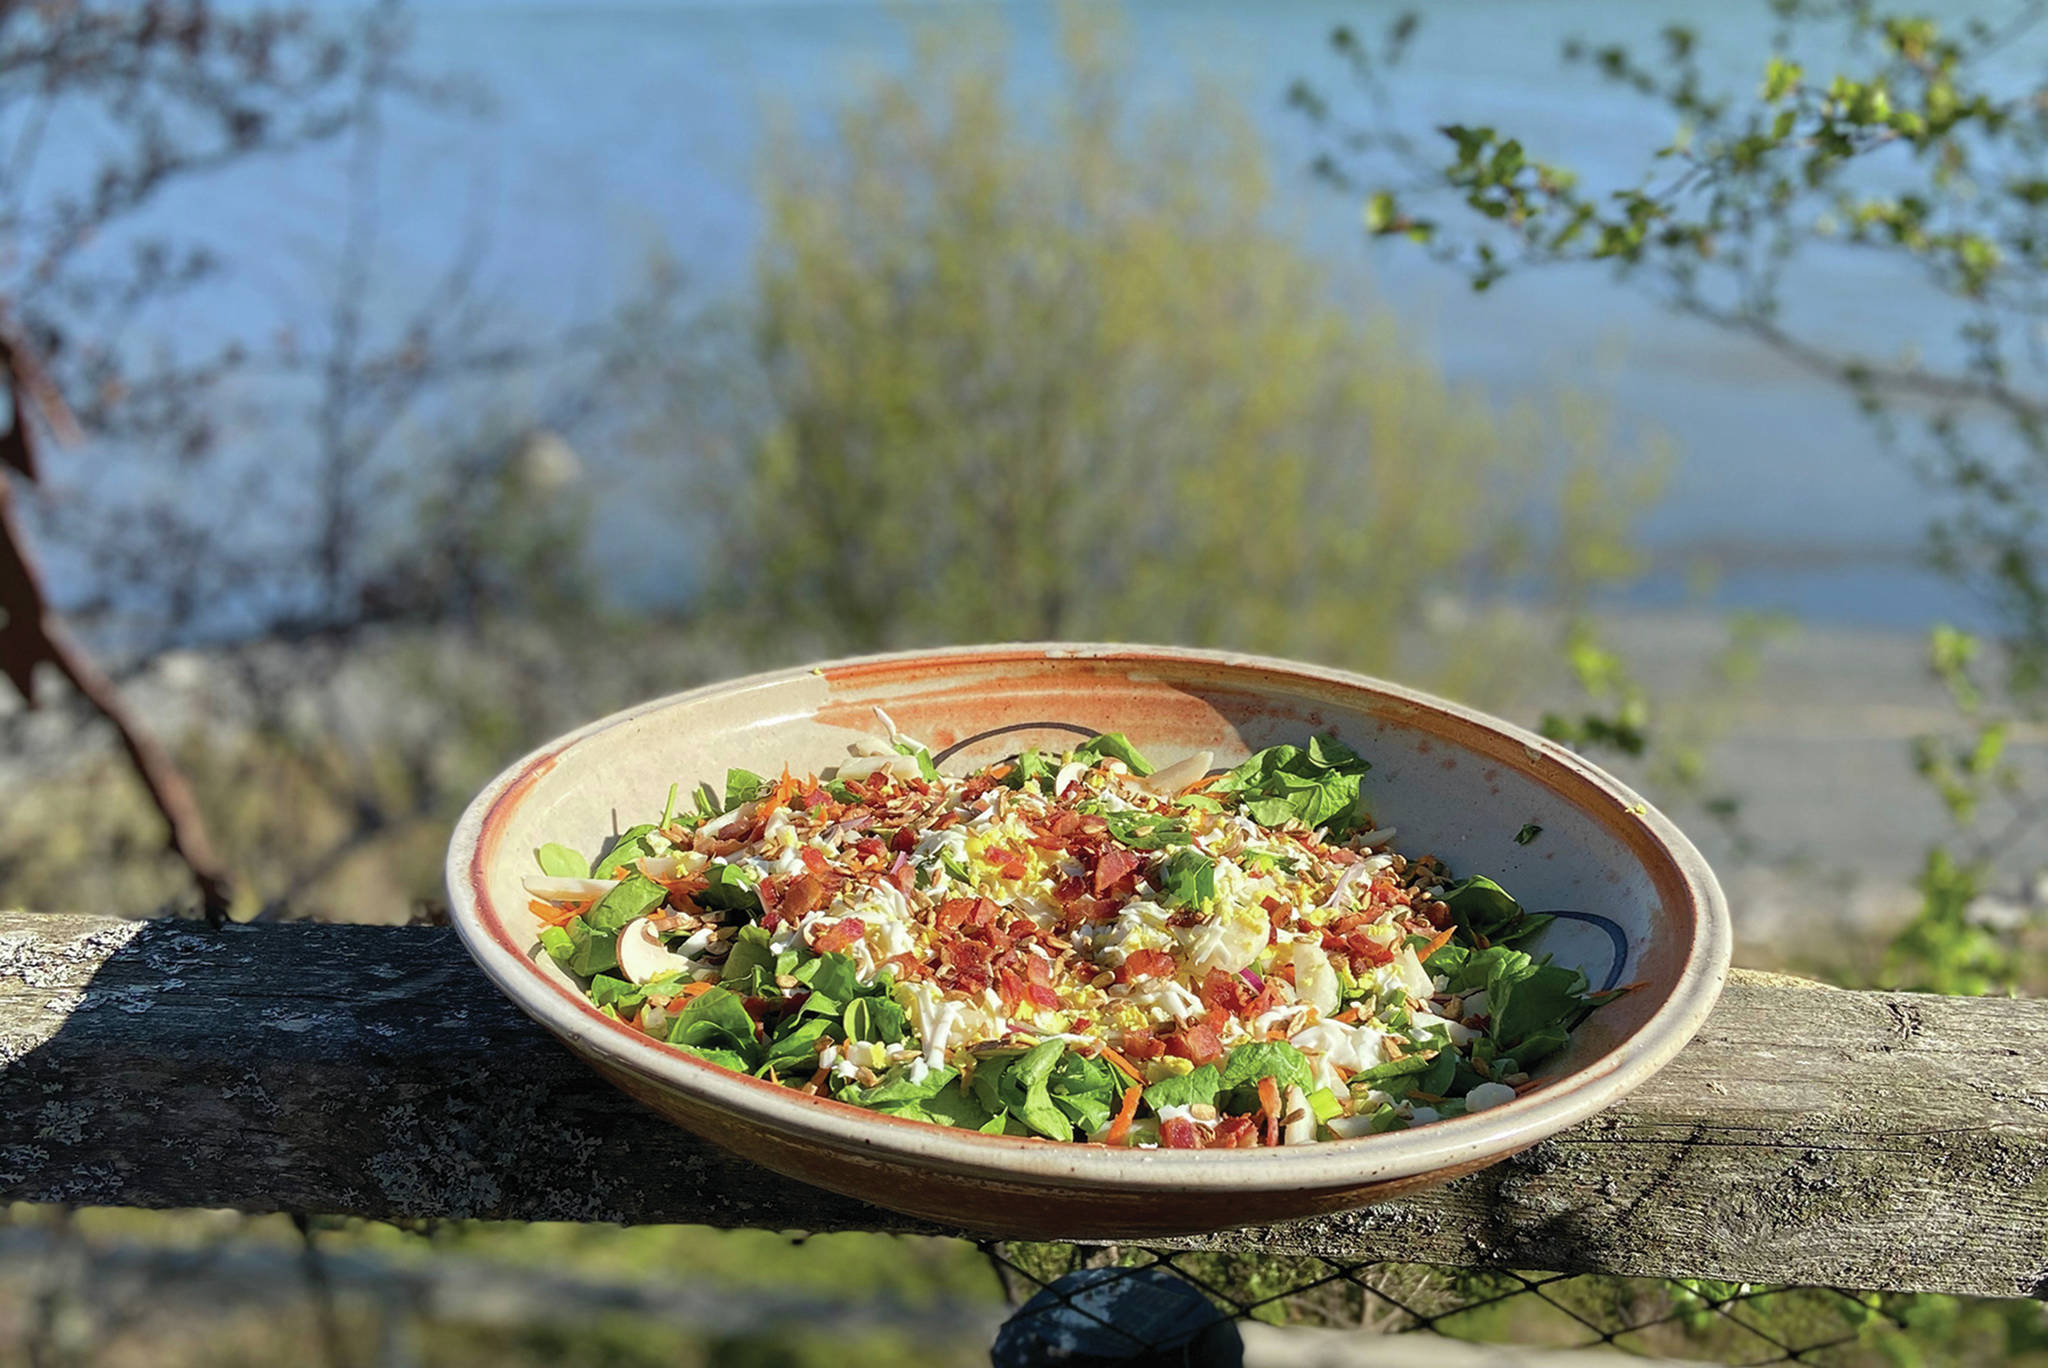 Kachemak Cuisine: Teri’s Special Spinach Salad is perfect for Memorial Day weekend